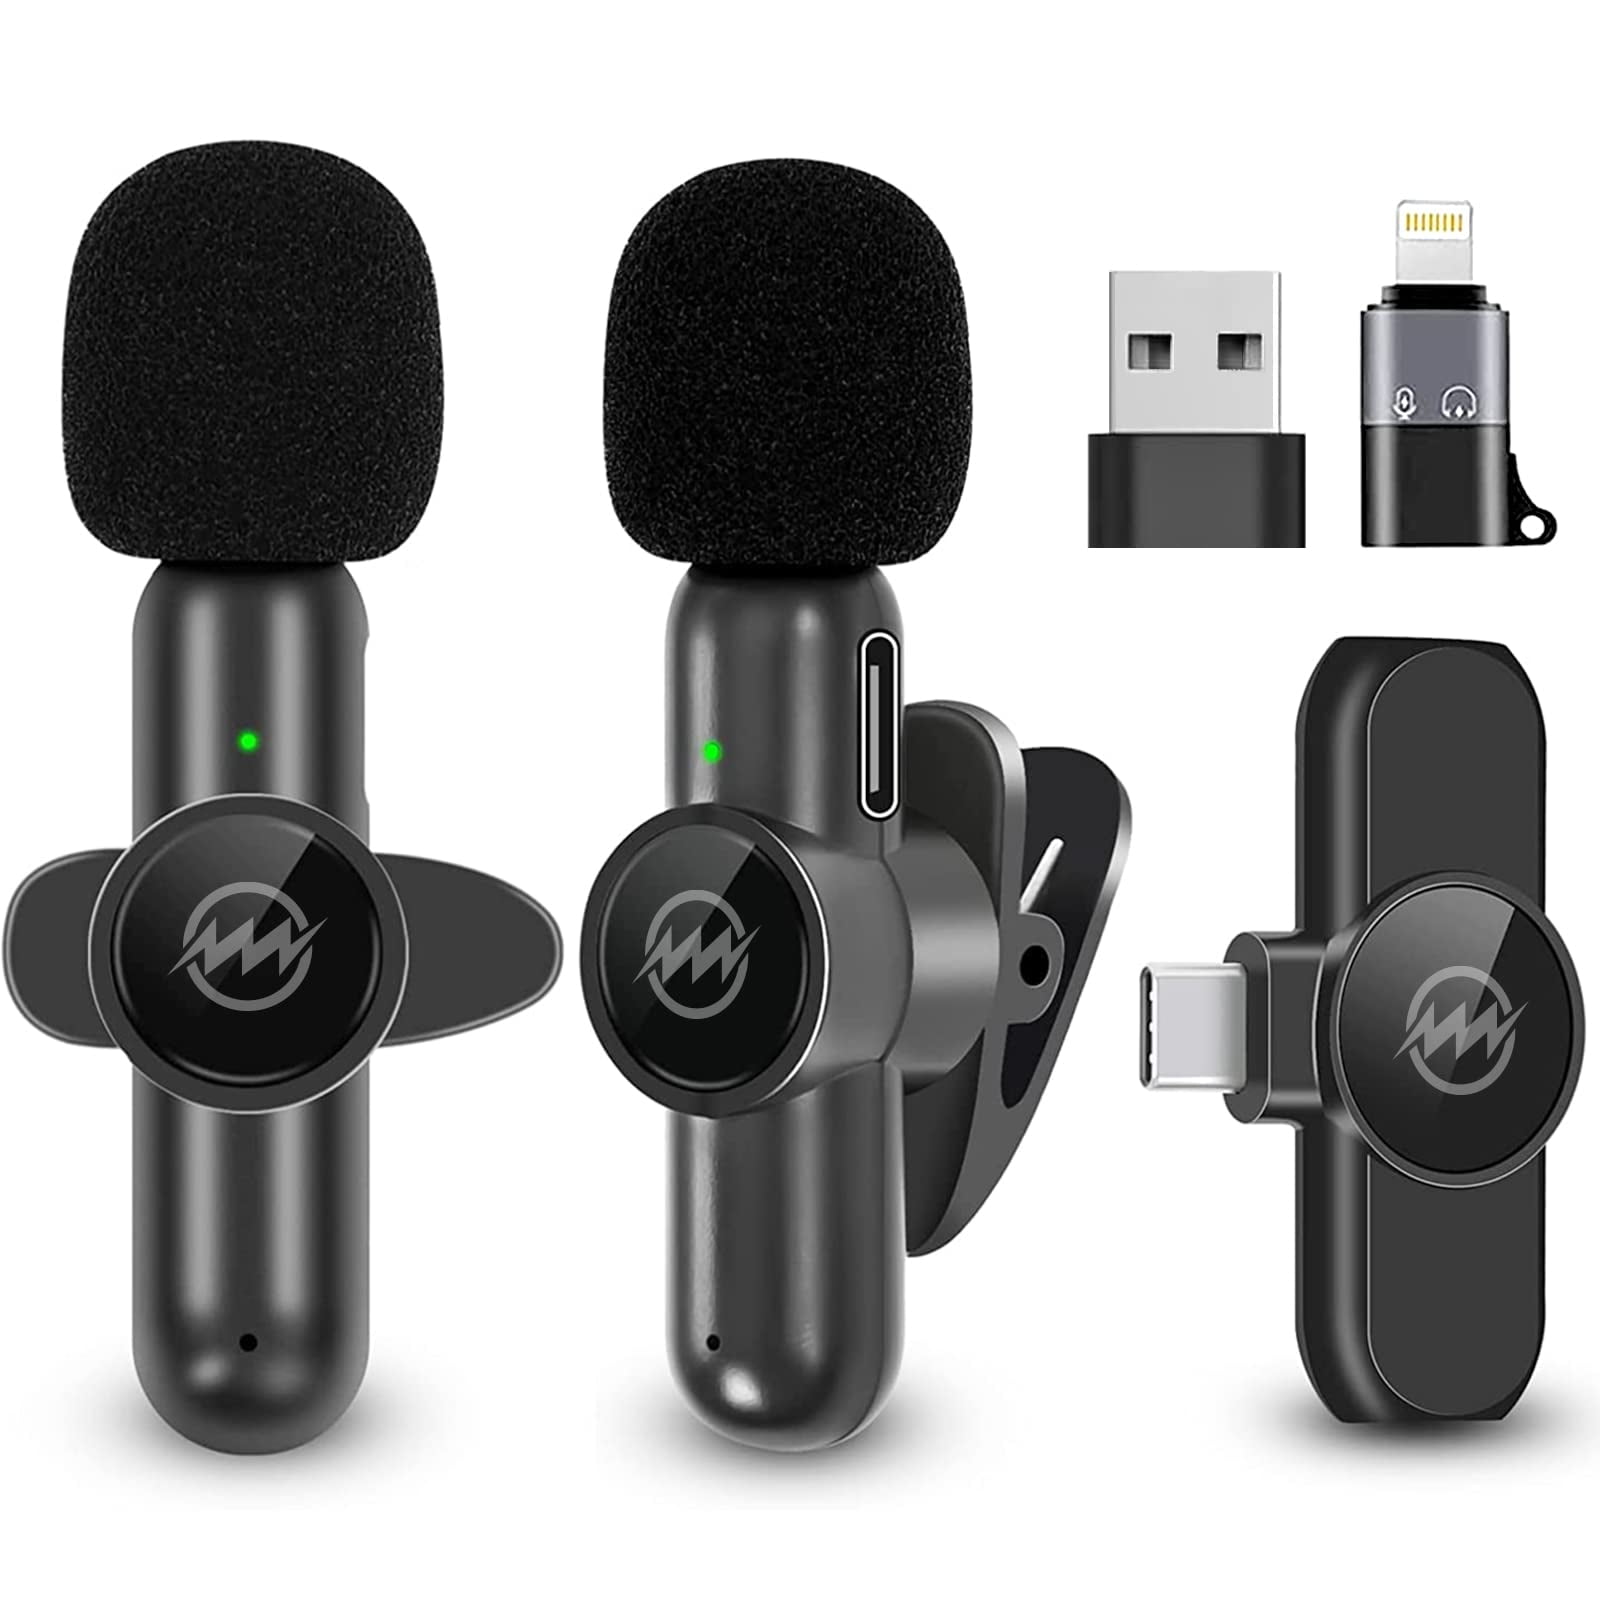 NEWWARE 2 Pack Wireless Lavalier Microphones for Android/iPhone /Computer/Laptop,USB-C to USB Adaptor & Lightning Port,12H 1 Person Use,Clip on Lapel Mic for Video Recording Vlogging Podcast Tiktok - Walmart.com